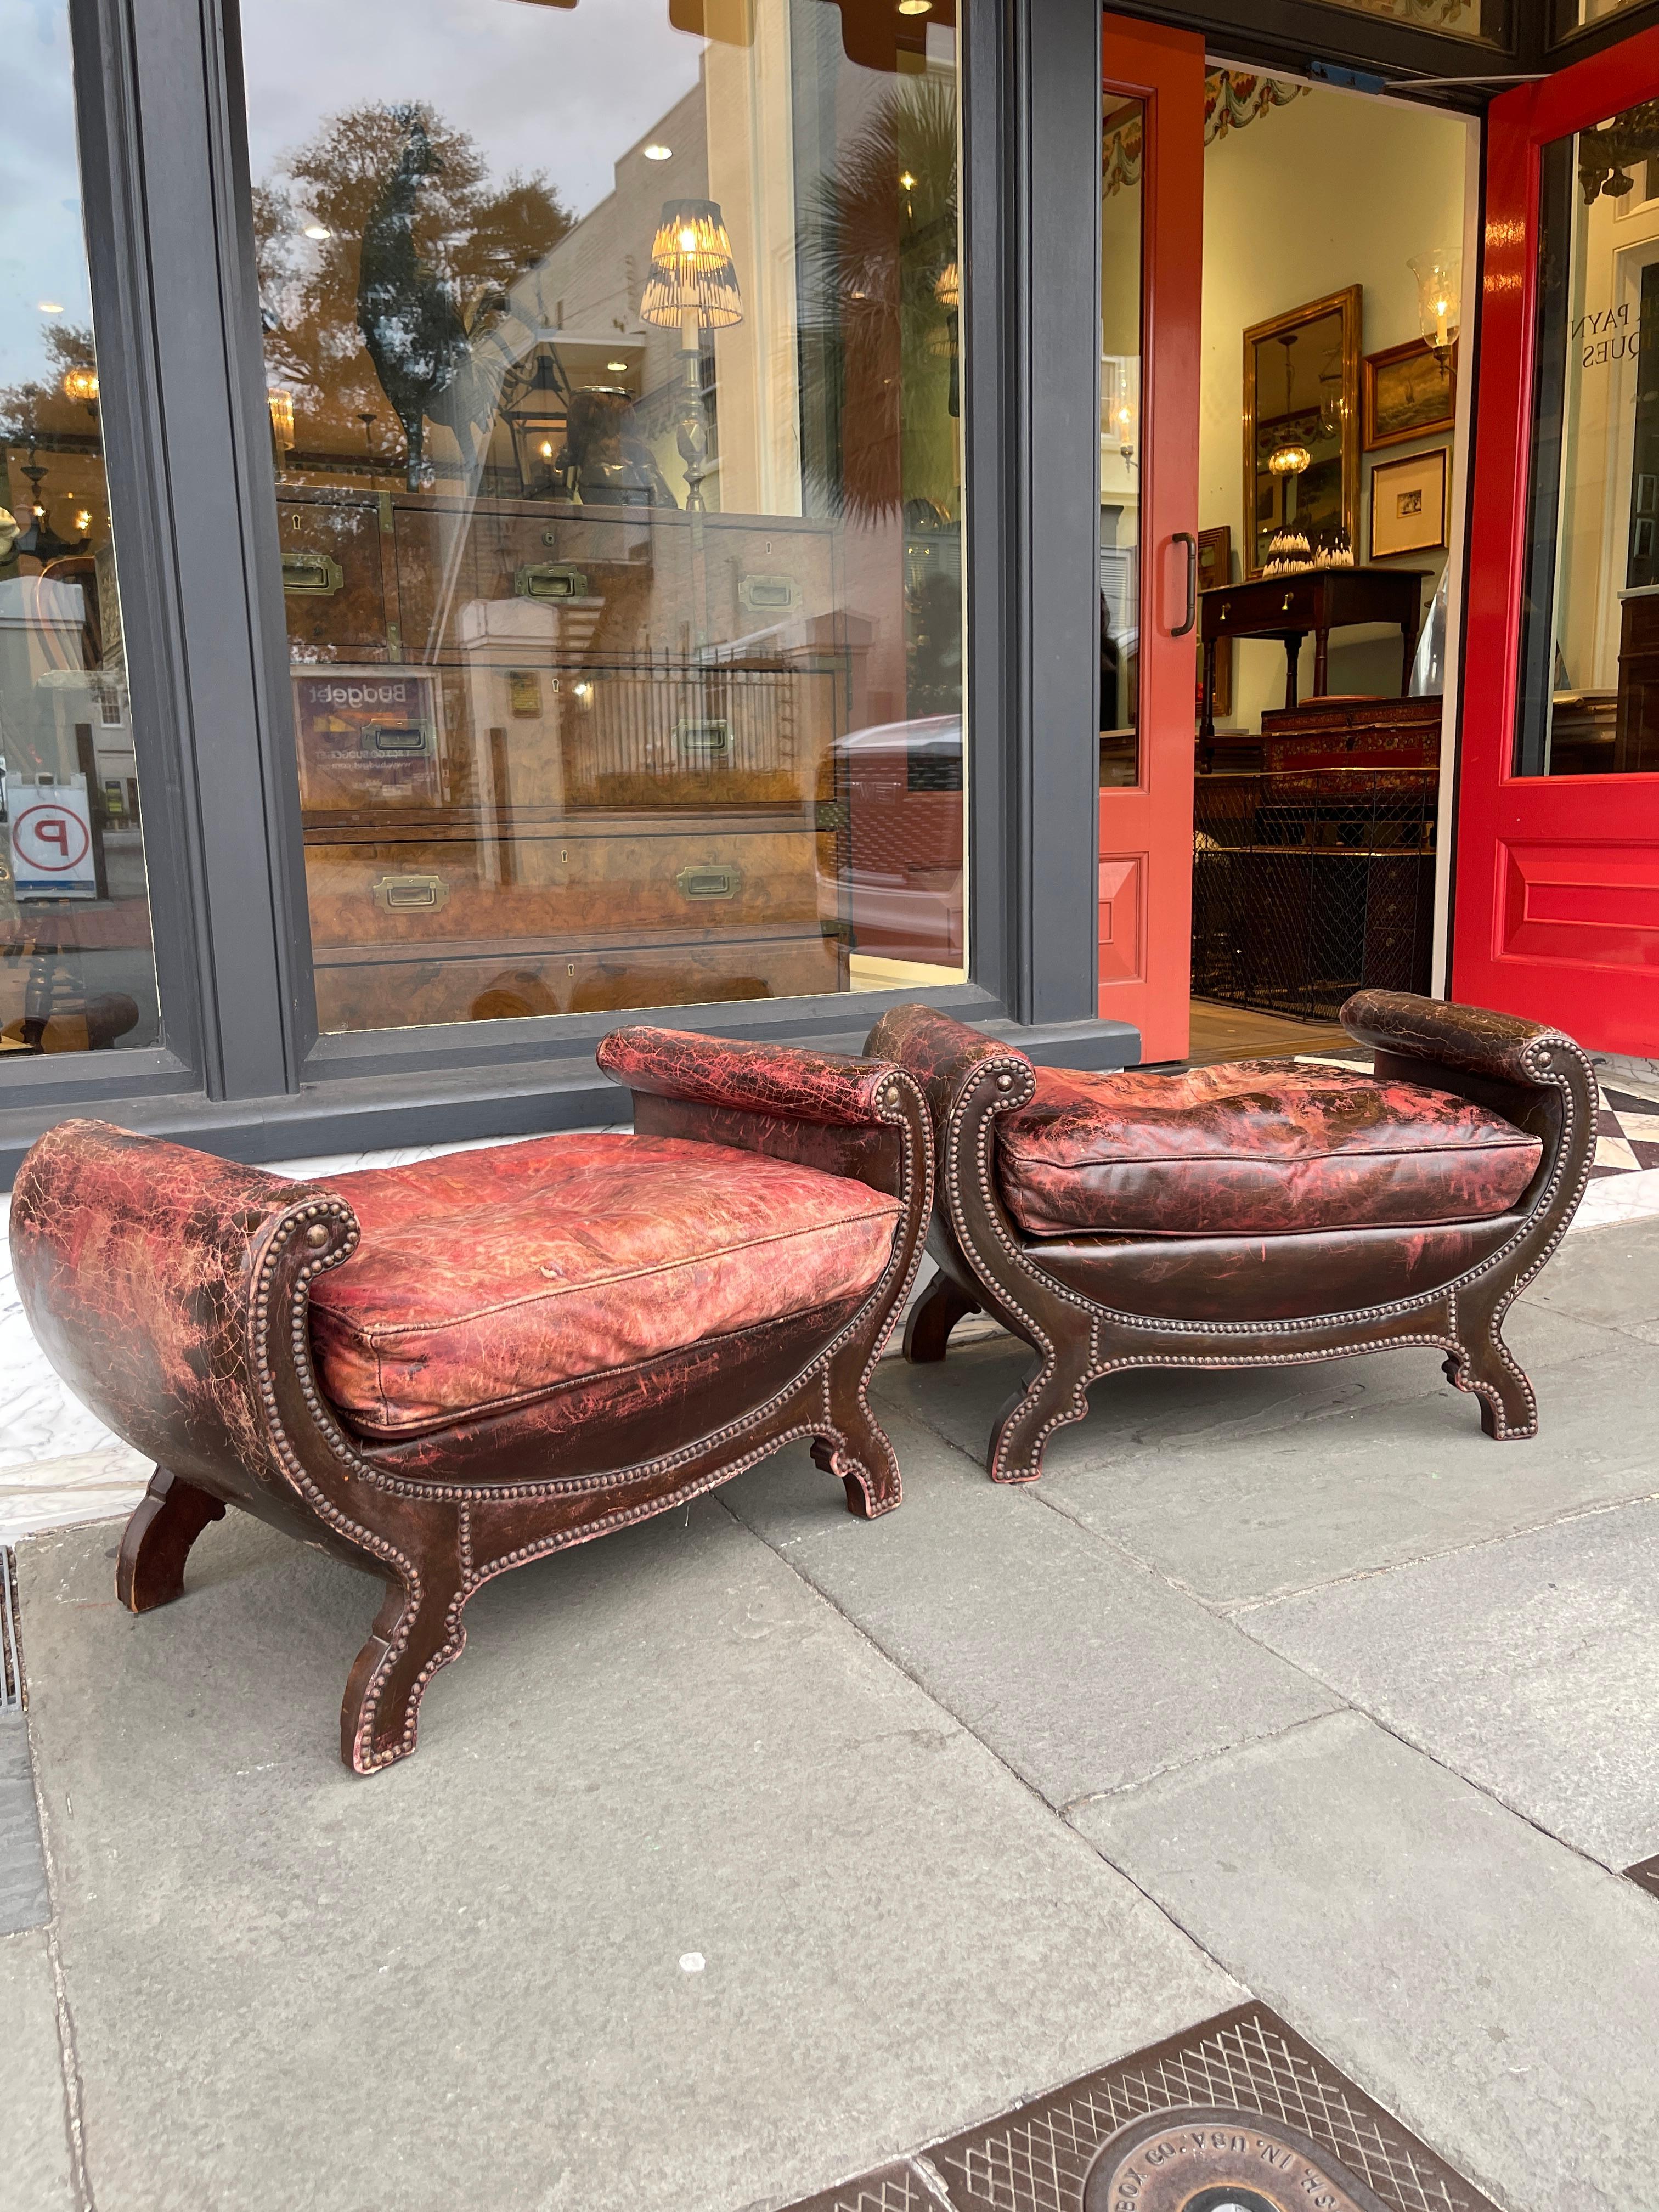 Pair of English leather window benches. Leather is very worn but in good condition. The color is faded between red and black. Please note leather condition in pictures 